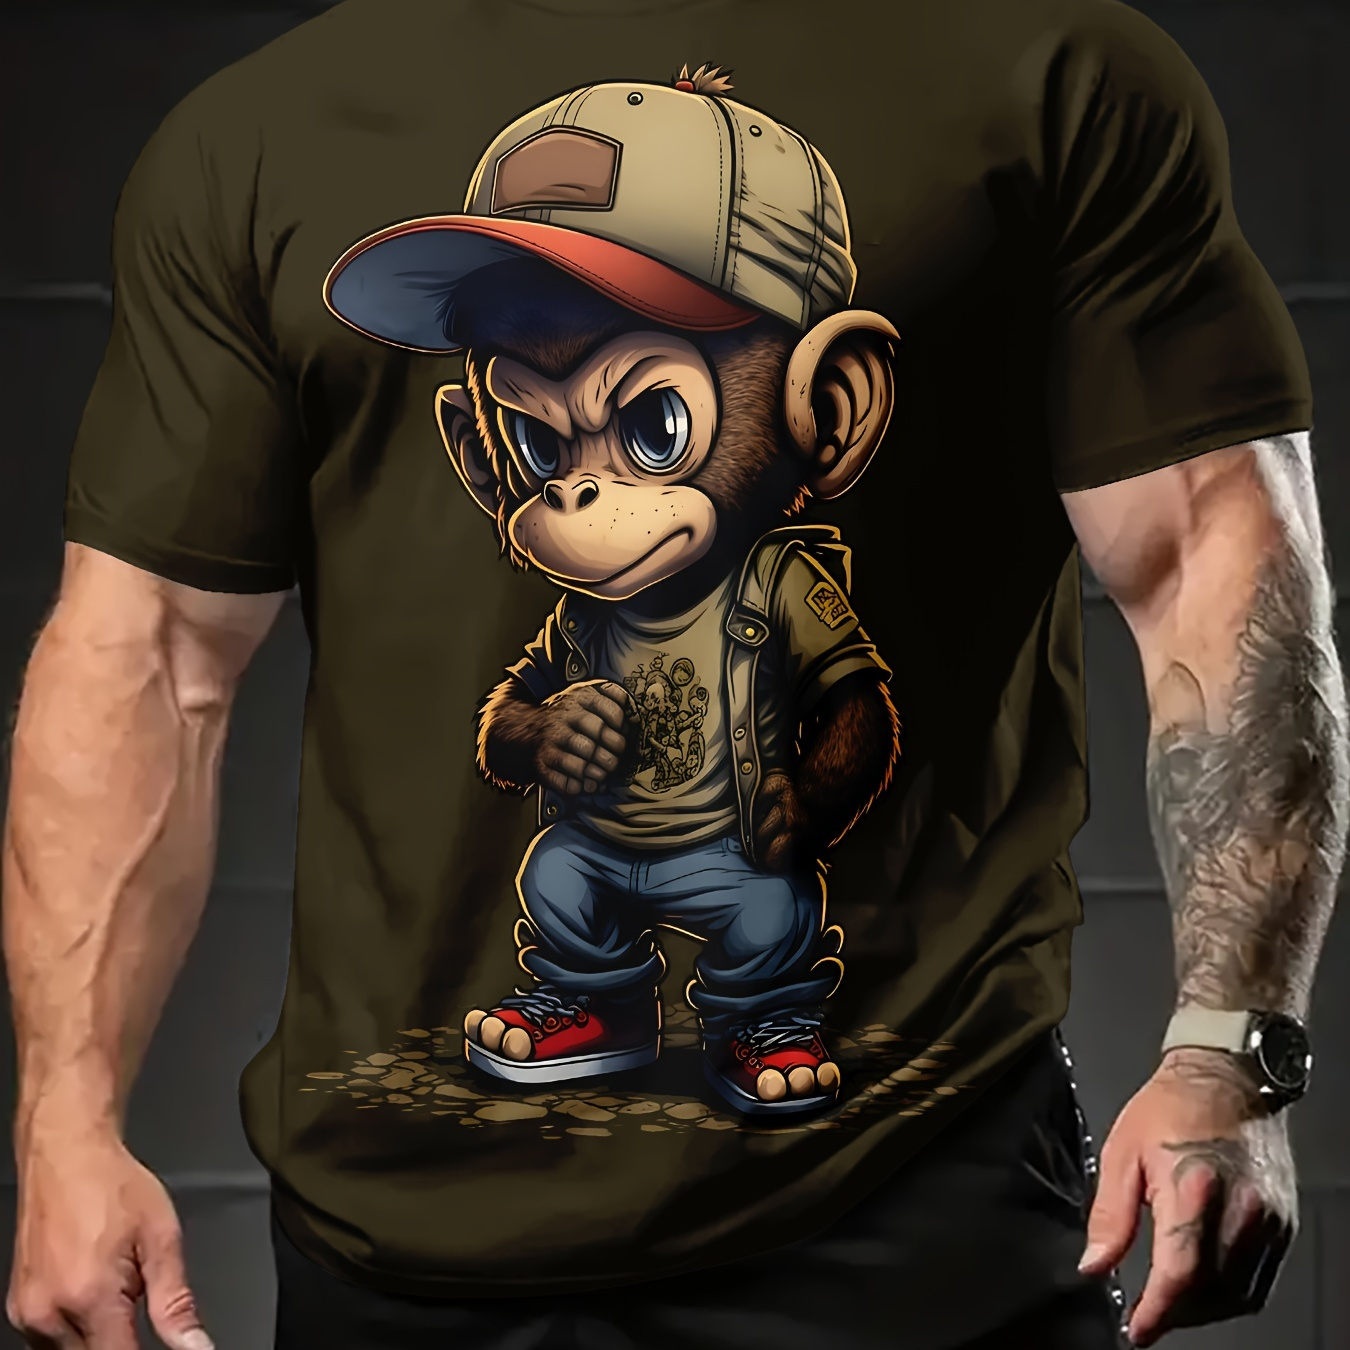 

Men's Monkey Graphic Print T-shirt, Casual Short Sleeve Crew Neck Tee, Men's Clothing For Summer Outdoor